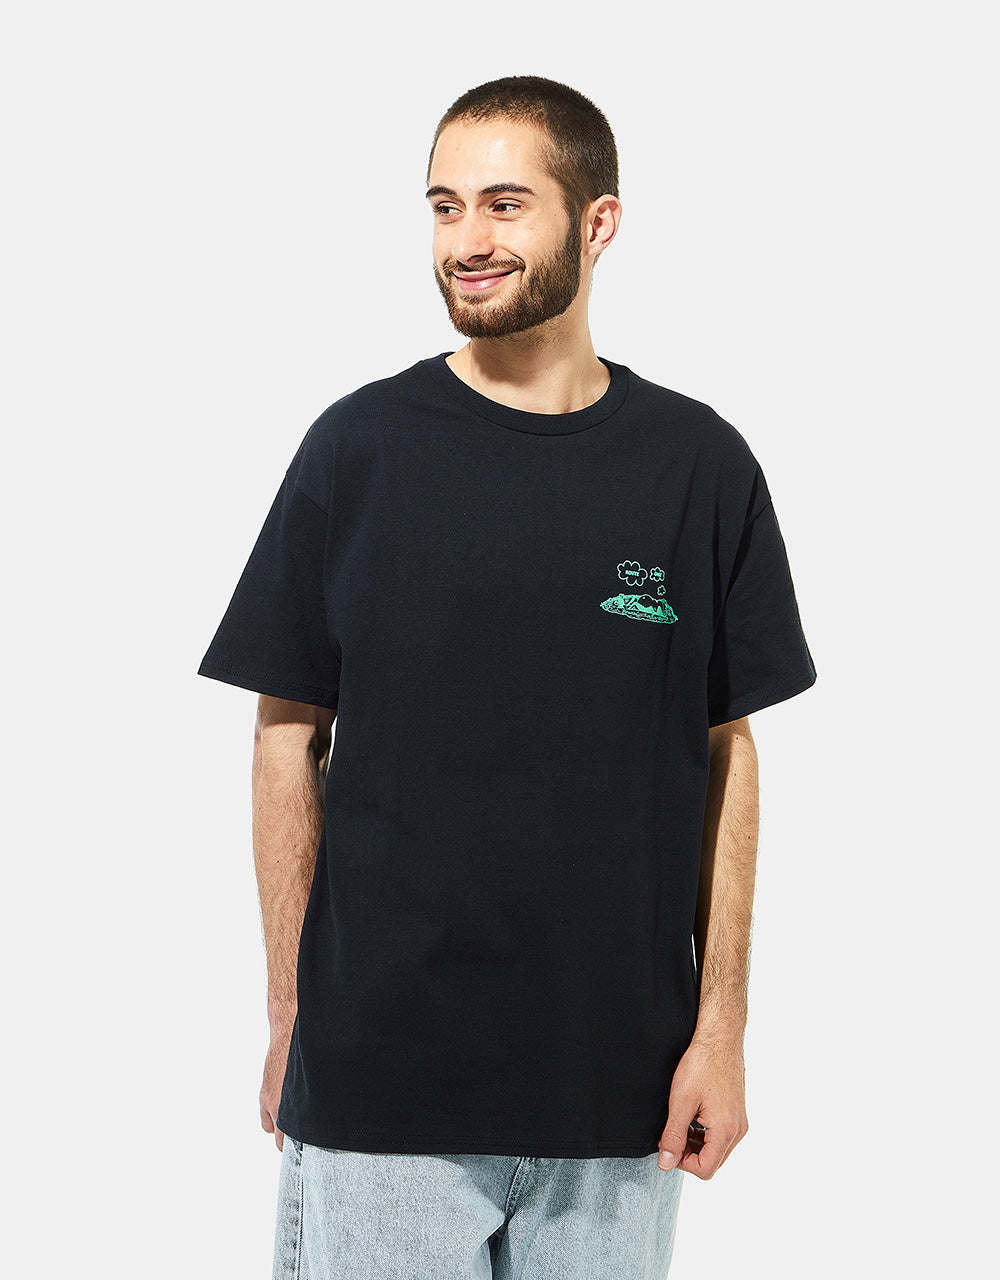 Route One Pondering T-Shirt - Black